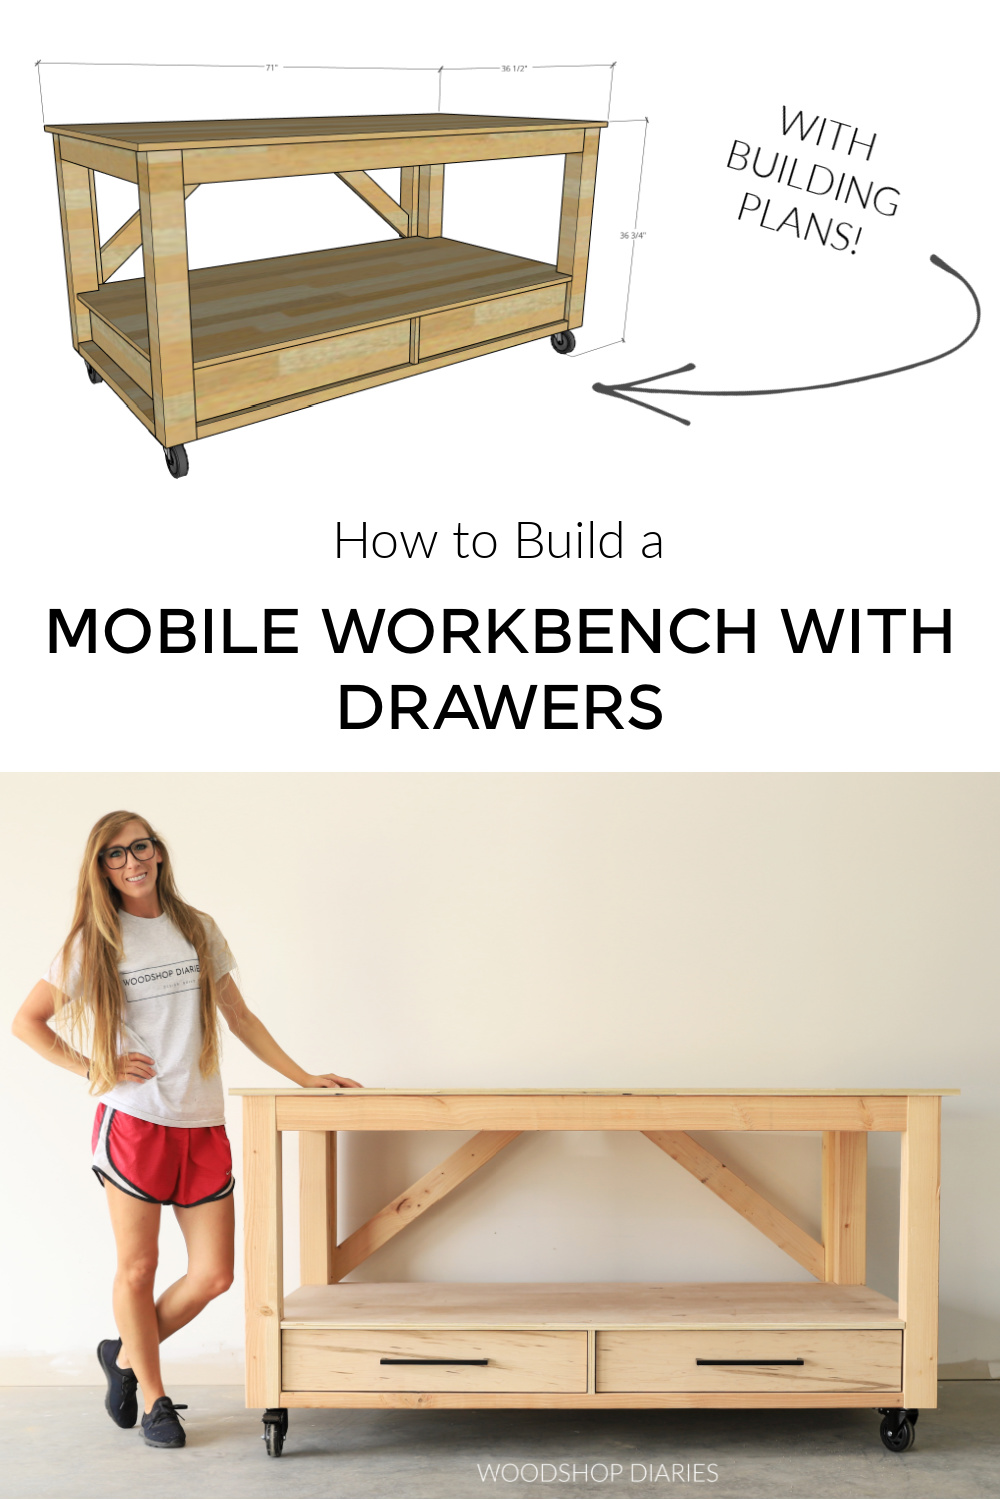 Pinterest collage image showing overall dimensional diagram at top and Shara next to completed DIY workbench at bottom with text "how to build a mobile workbench with drawers"